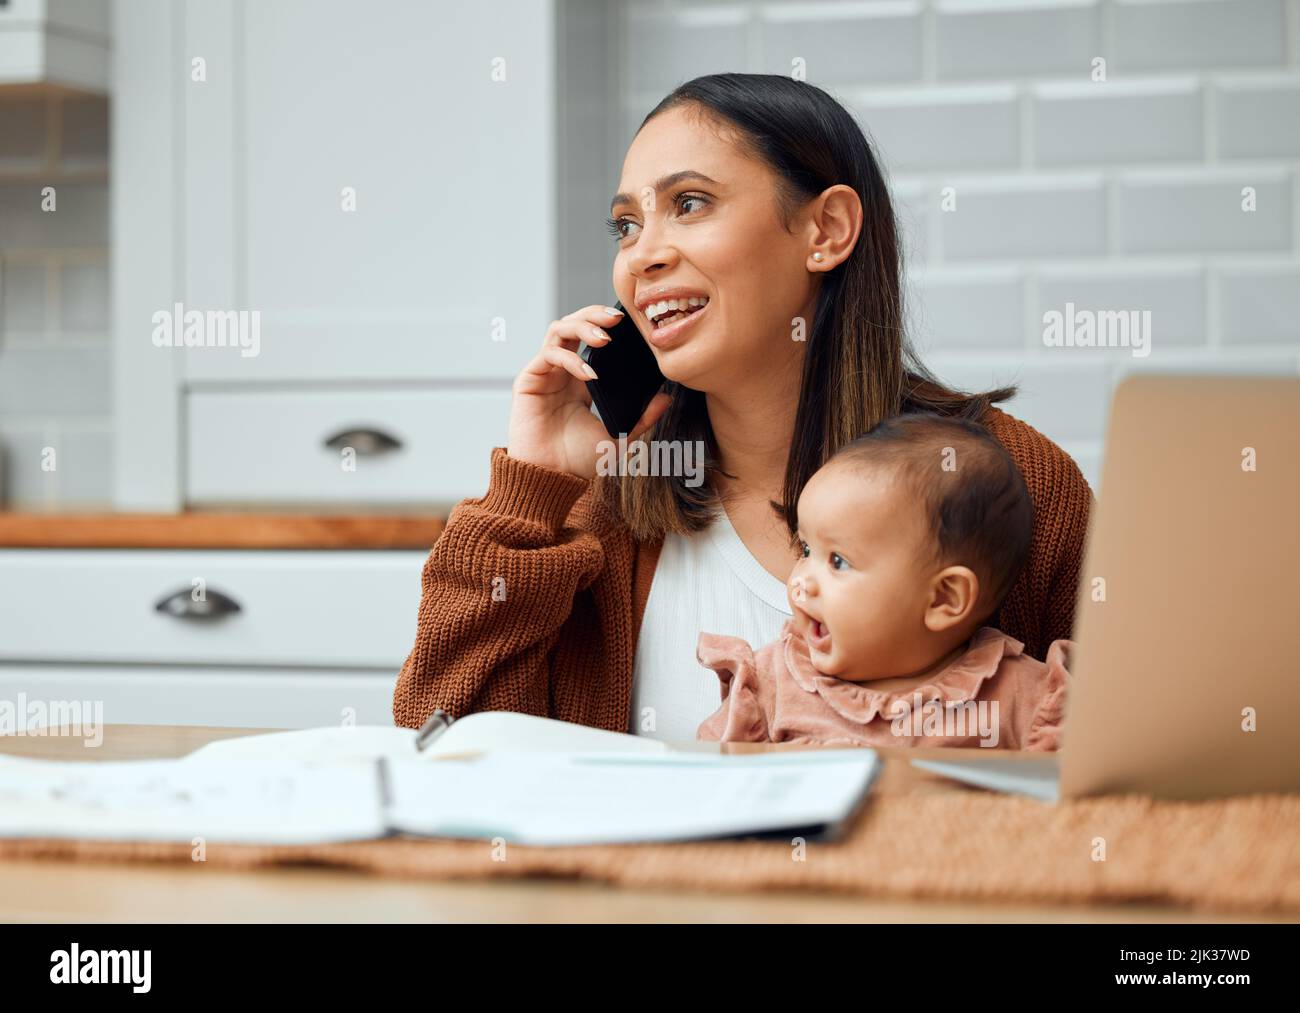 Theyre a package deal. an attractive young woman working at home with her newborn baby sitting on her laptop. Stock Photo